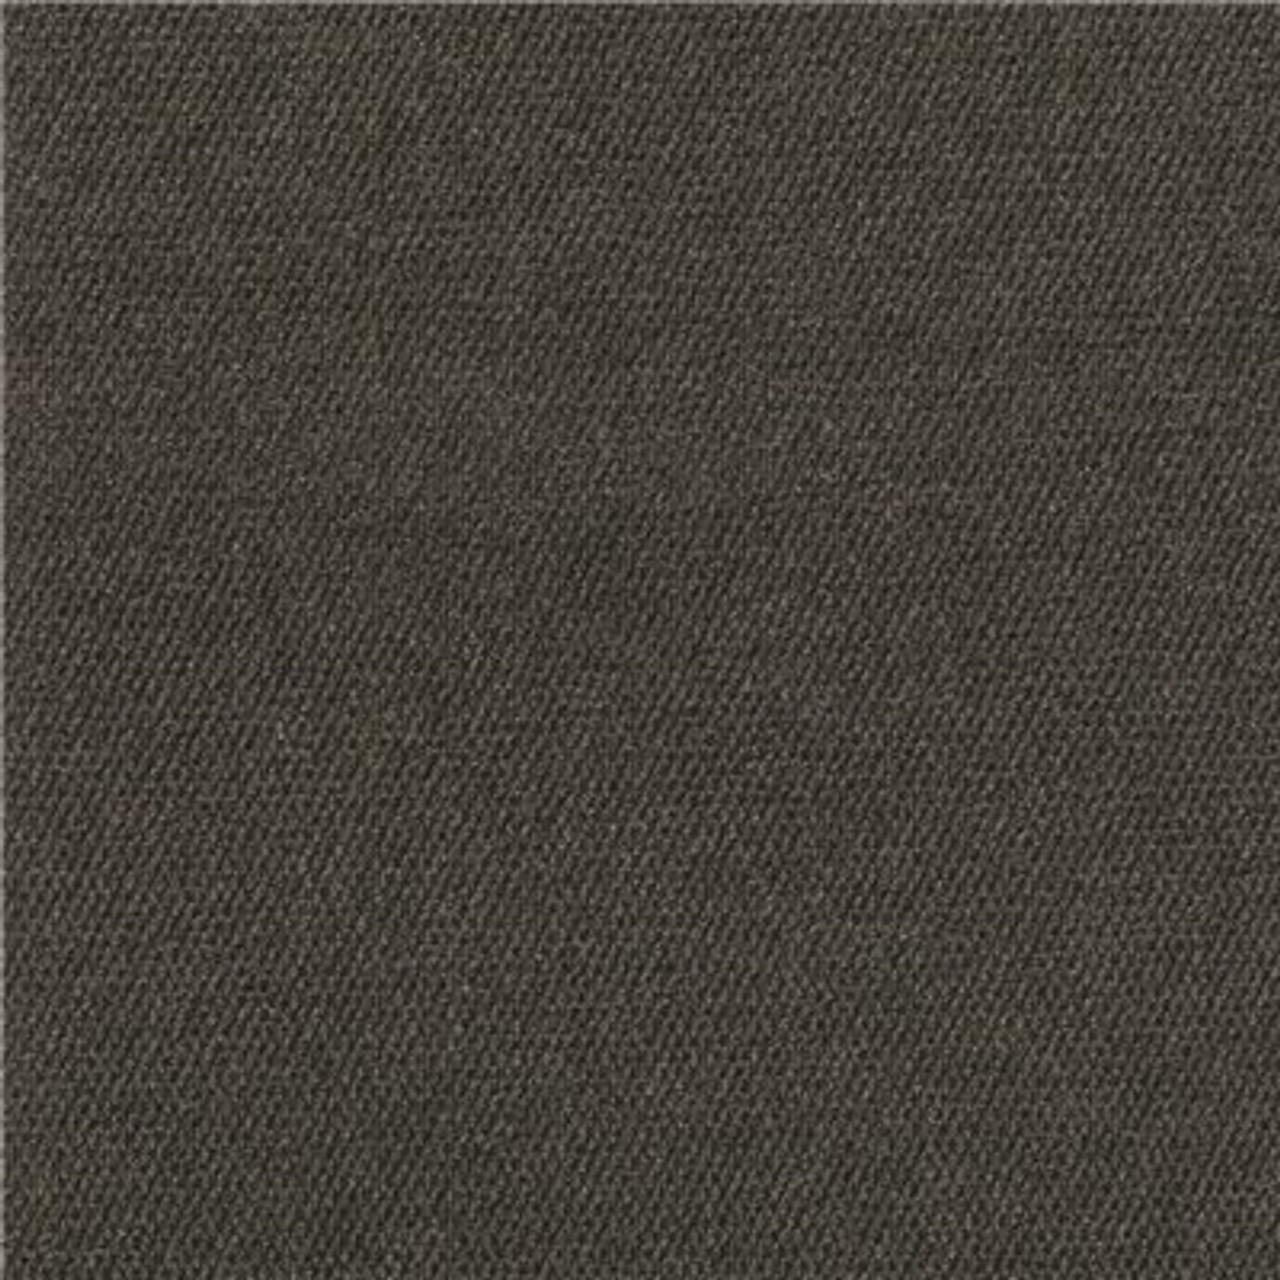 Foss Peel And Stick First Impressions Black Ice Hobnail Texture 24 In. X 24 In. Commercial Carpet Tile (15 Tiles/Case)